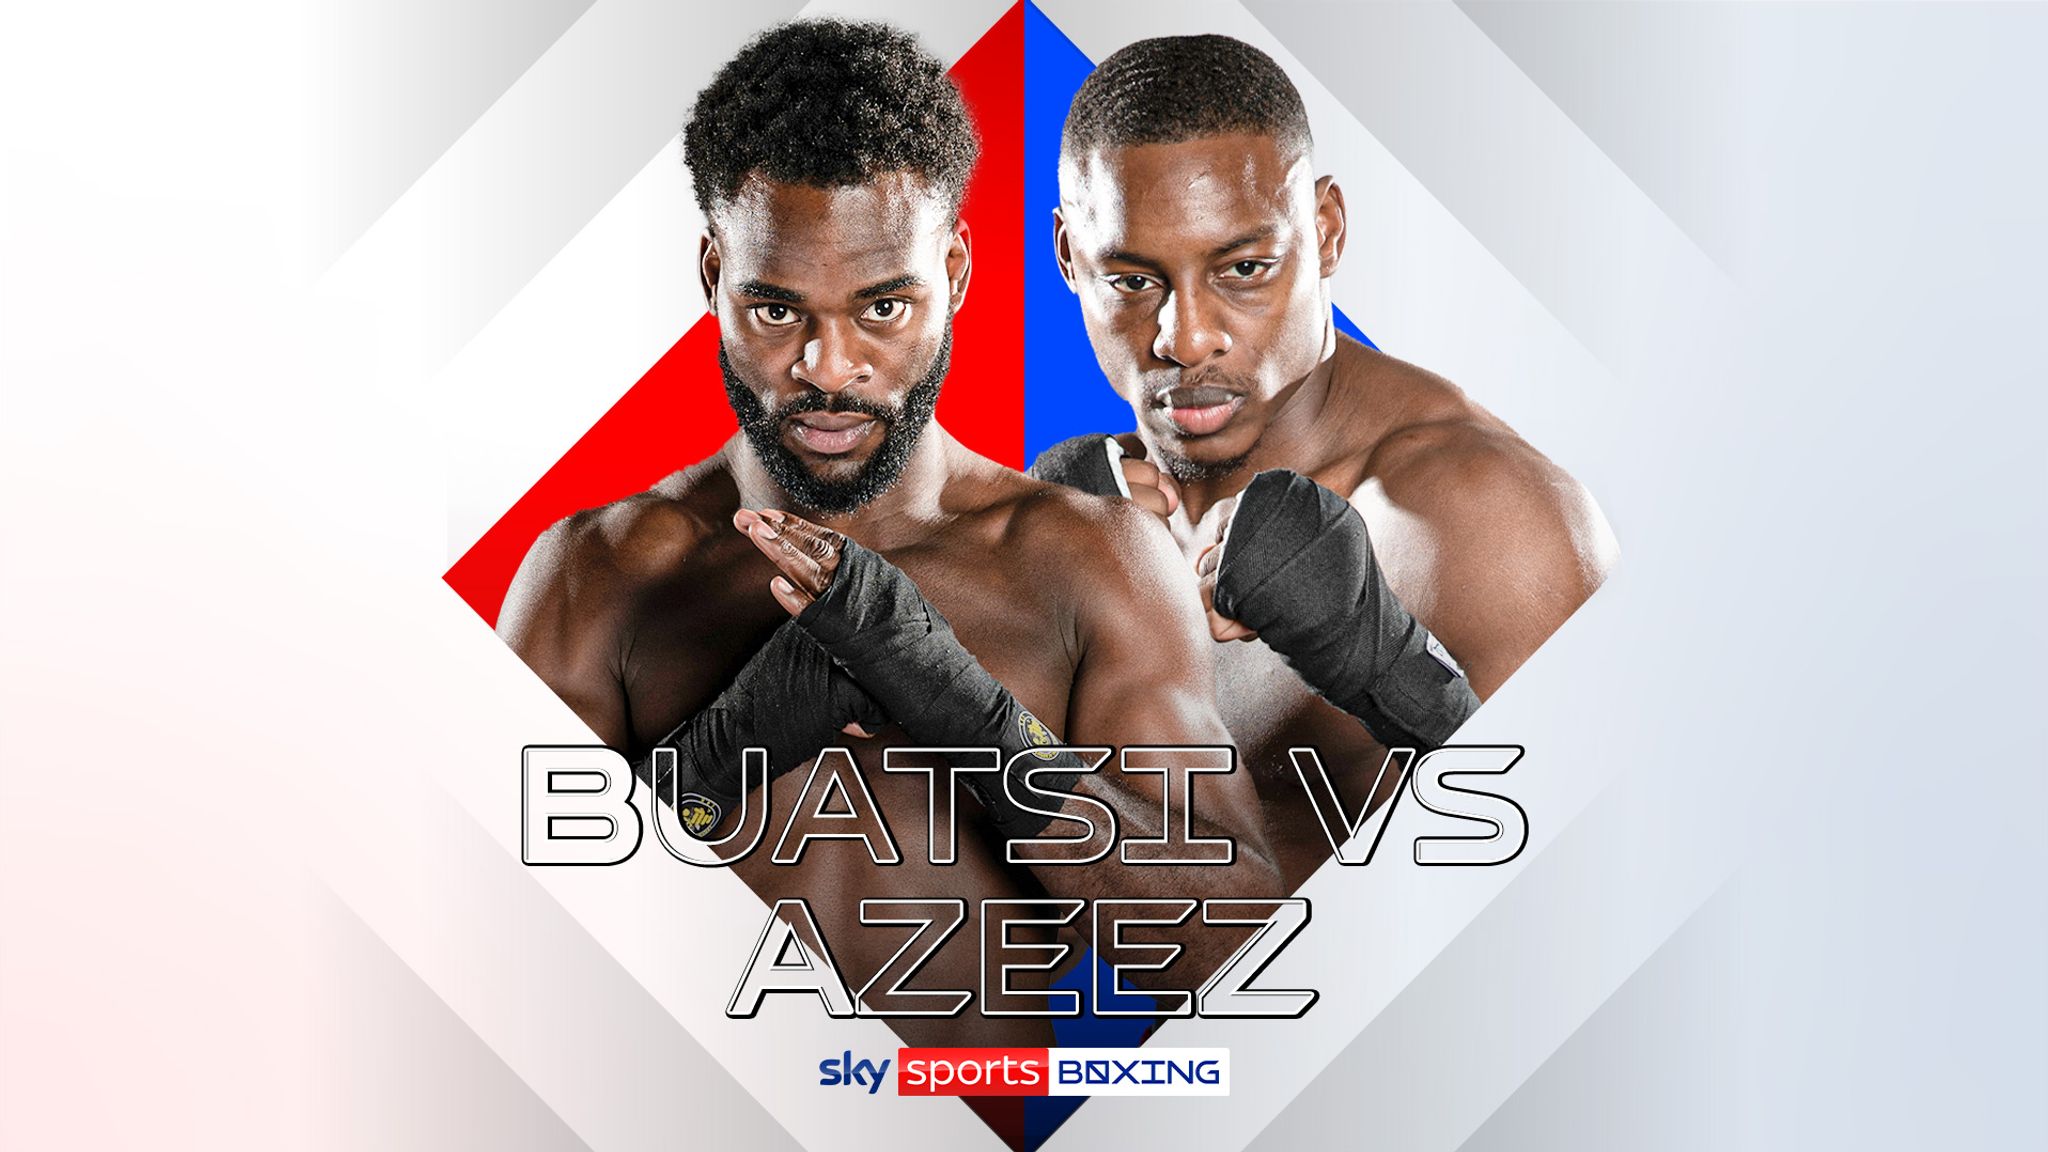 Buatsi vs Azeez Watch a live stream as British rivals sharpen their skills at media workout ahead of O2 fight on October 21 Boxing News Sky Sports